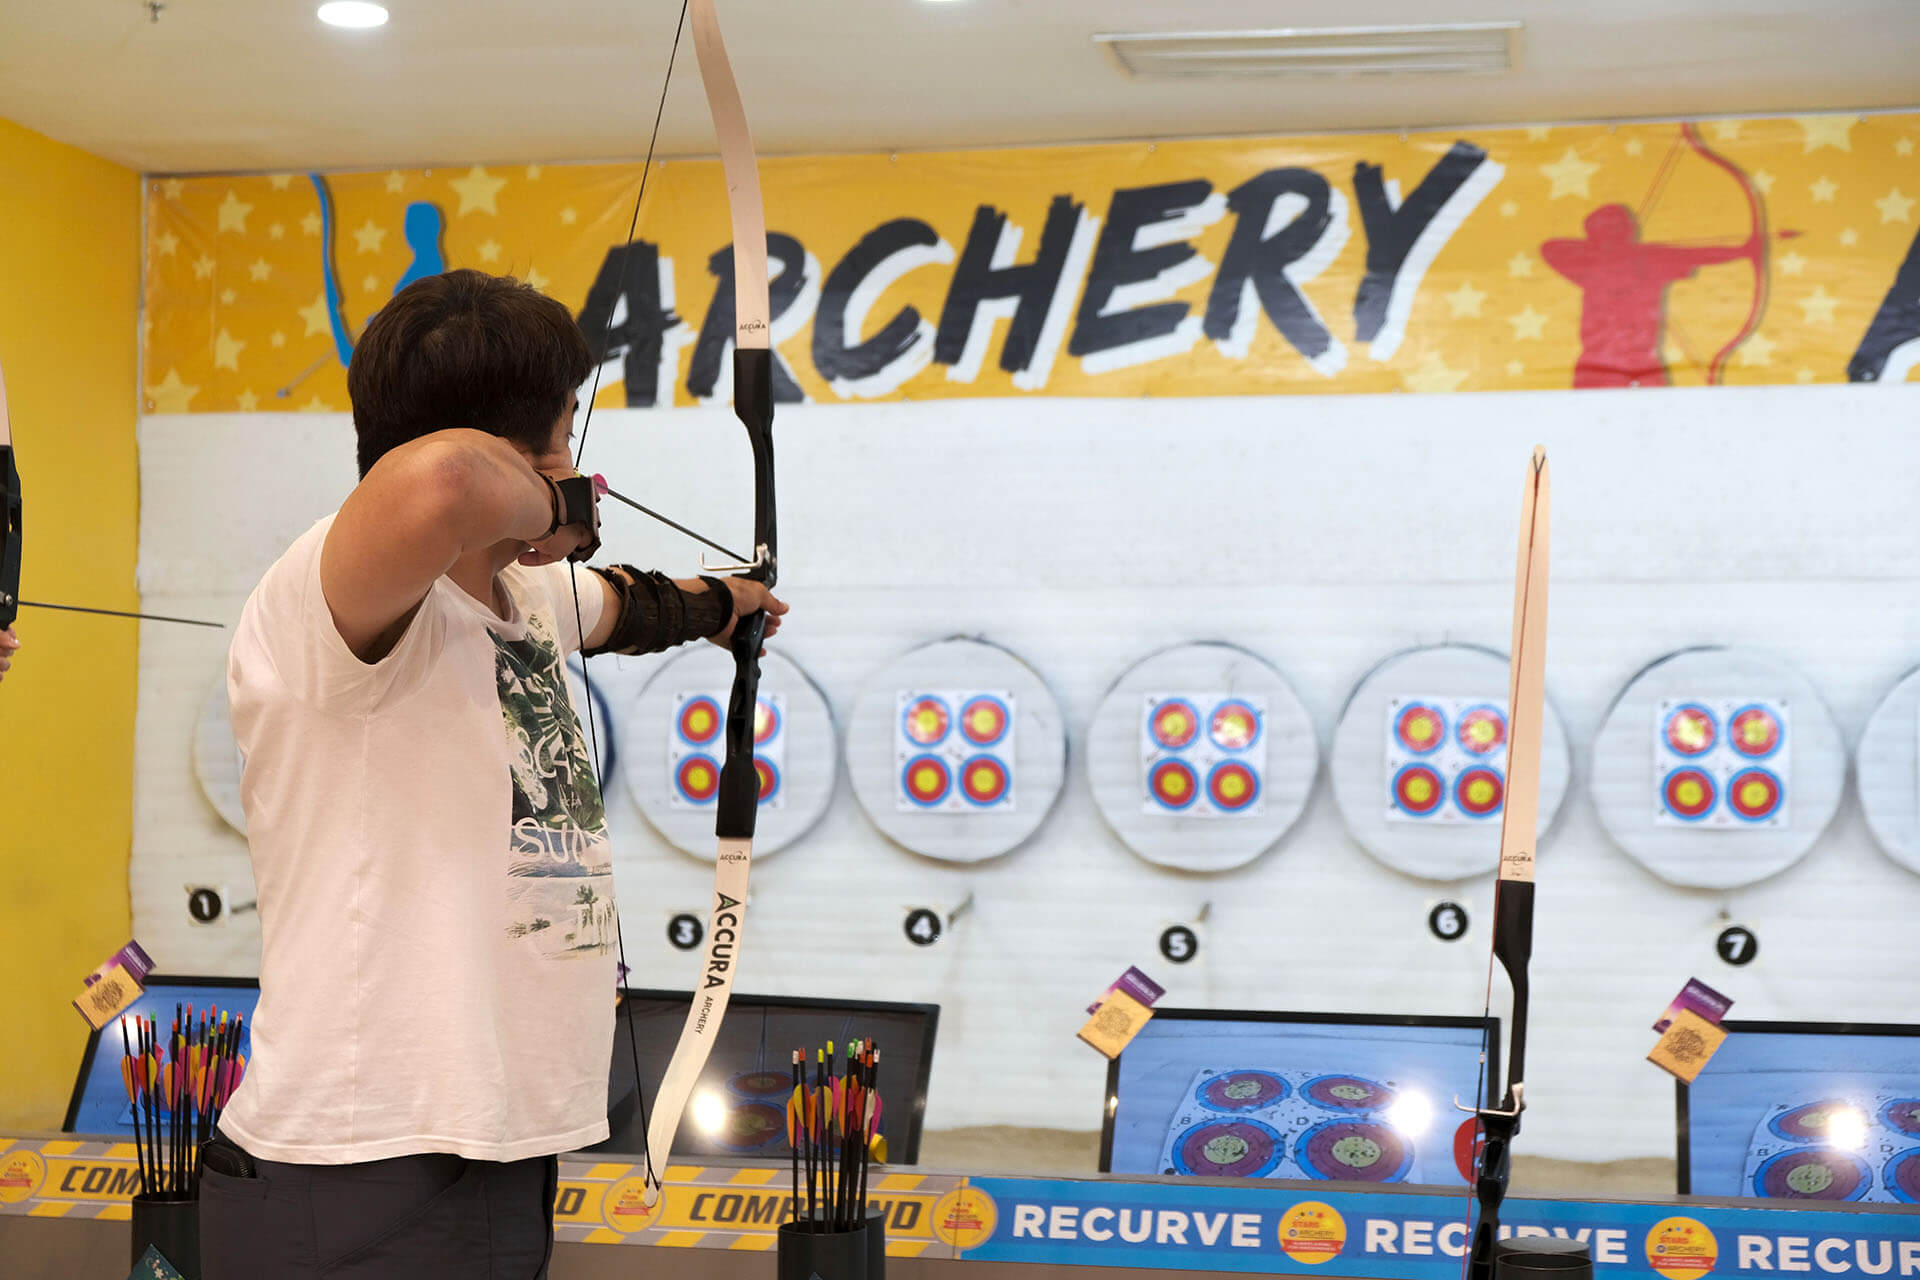 How accurate is your aim? Let’s put it to the test!